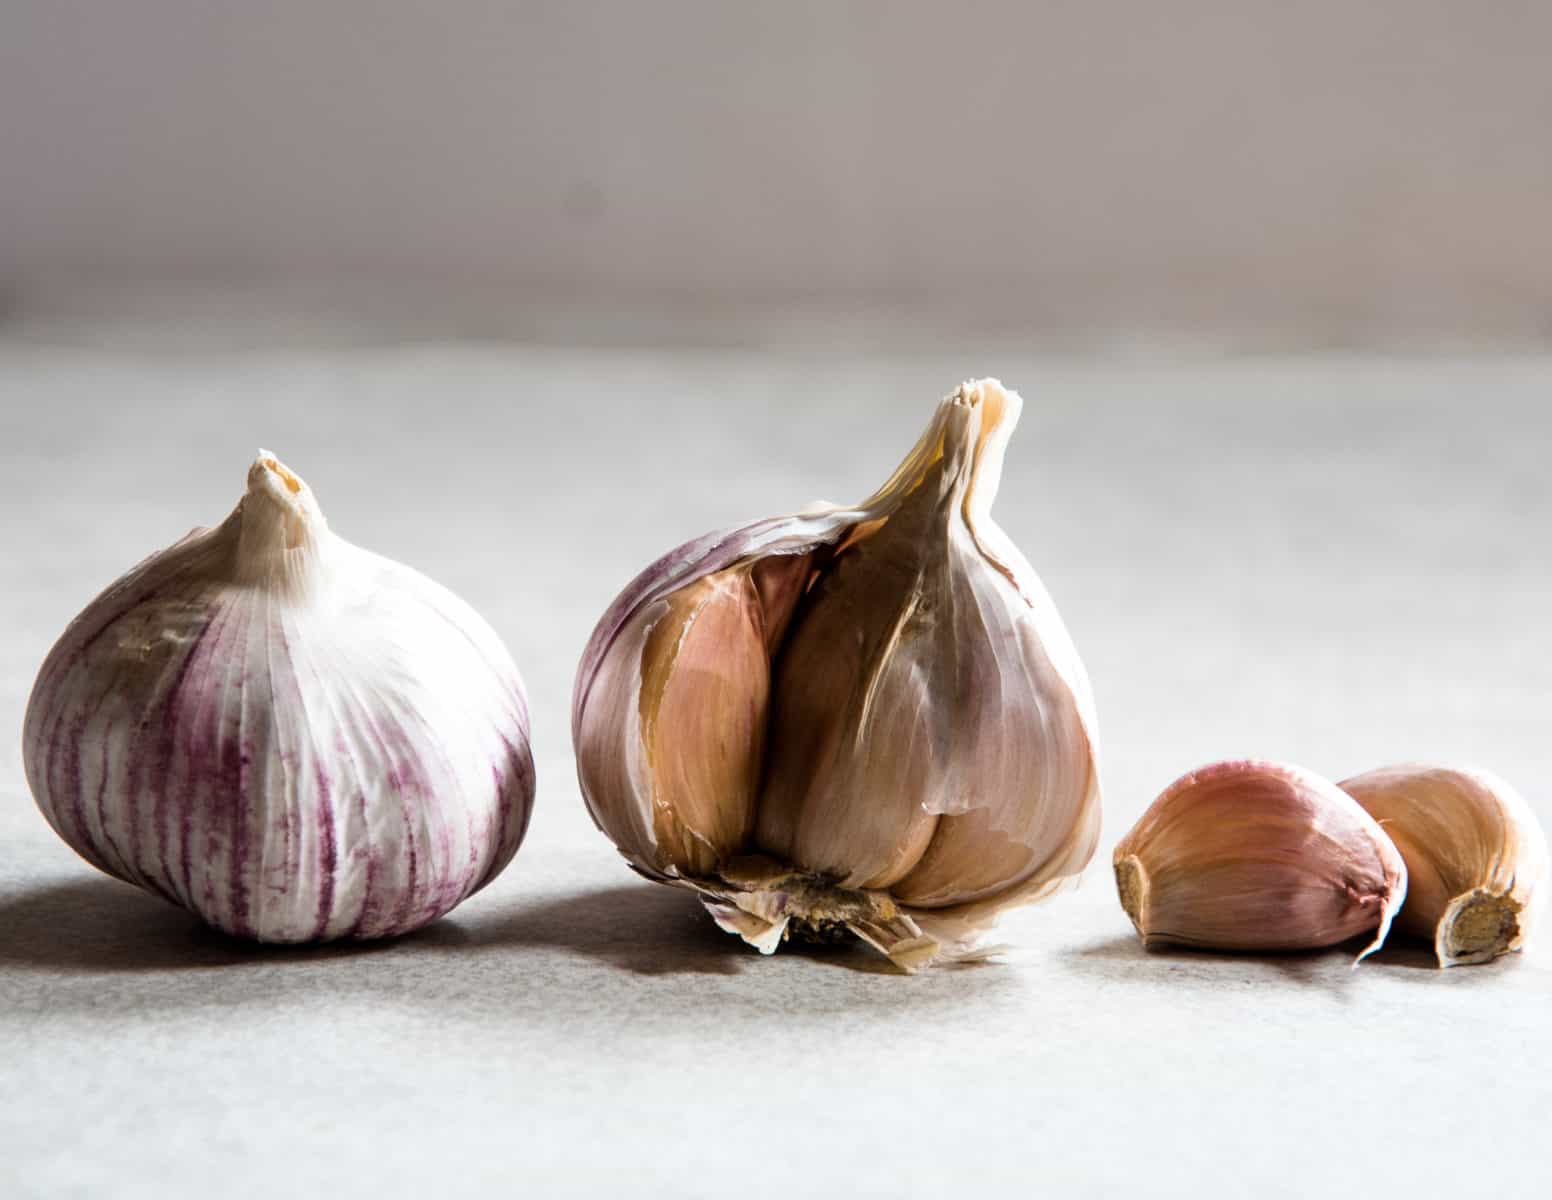 Whole heads of garlic next to two garlic cloves. 